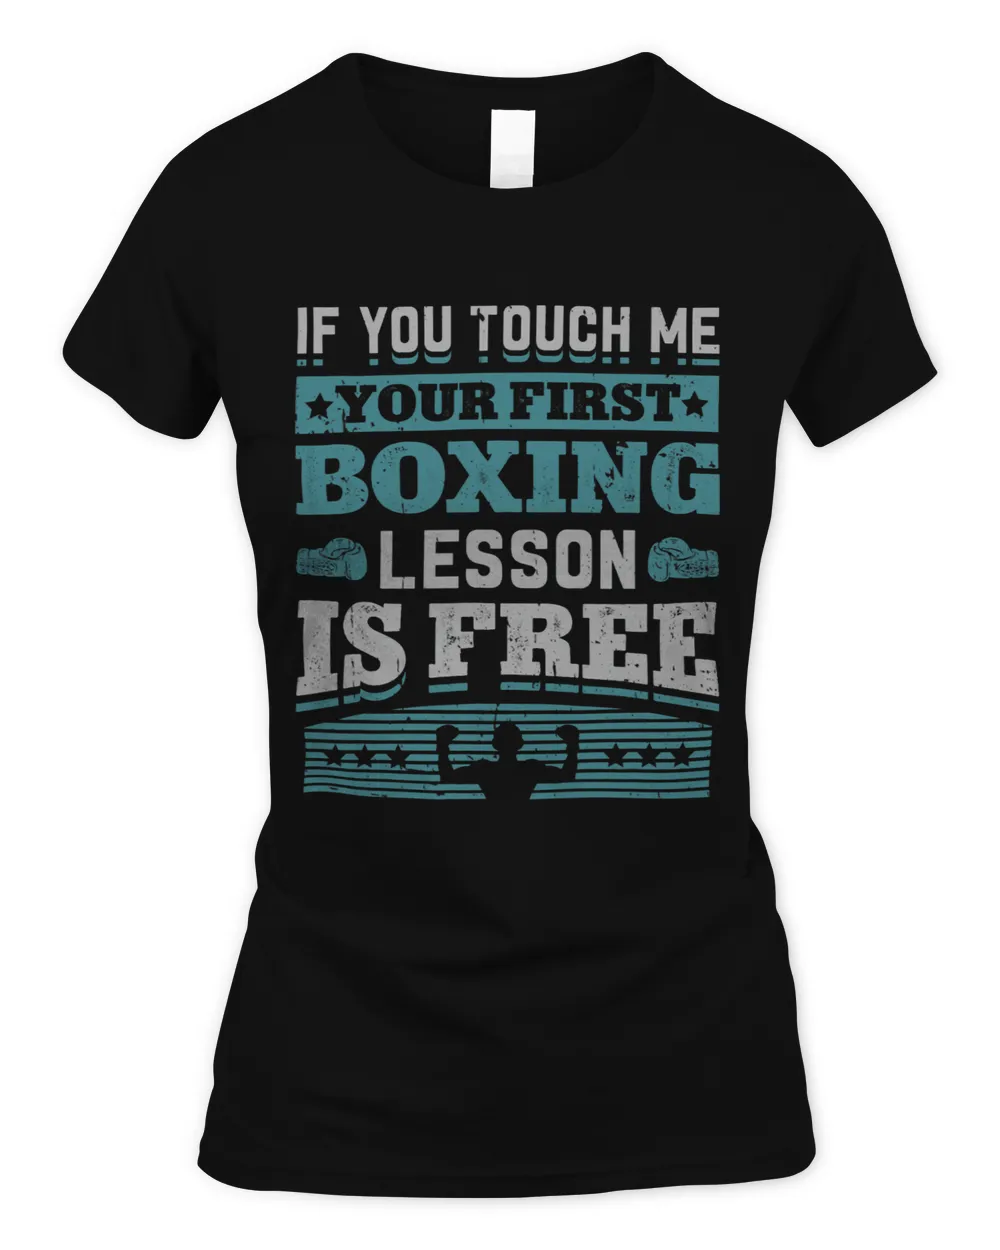 Touch Me And Your First Boxing Lesson Is free 2Boxing